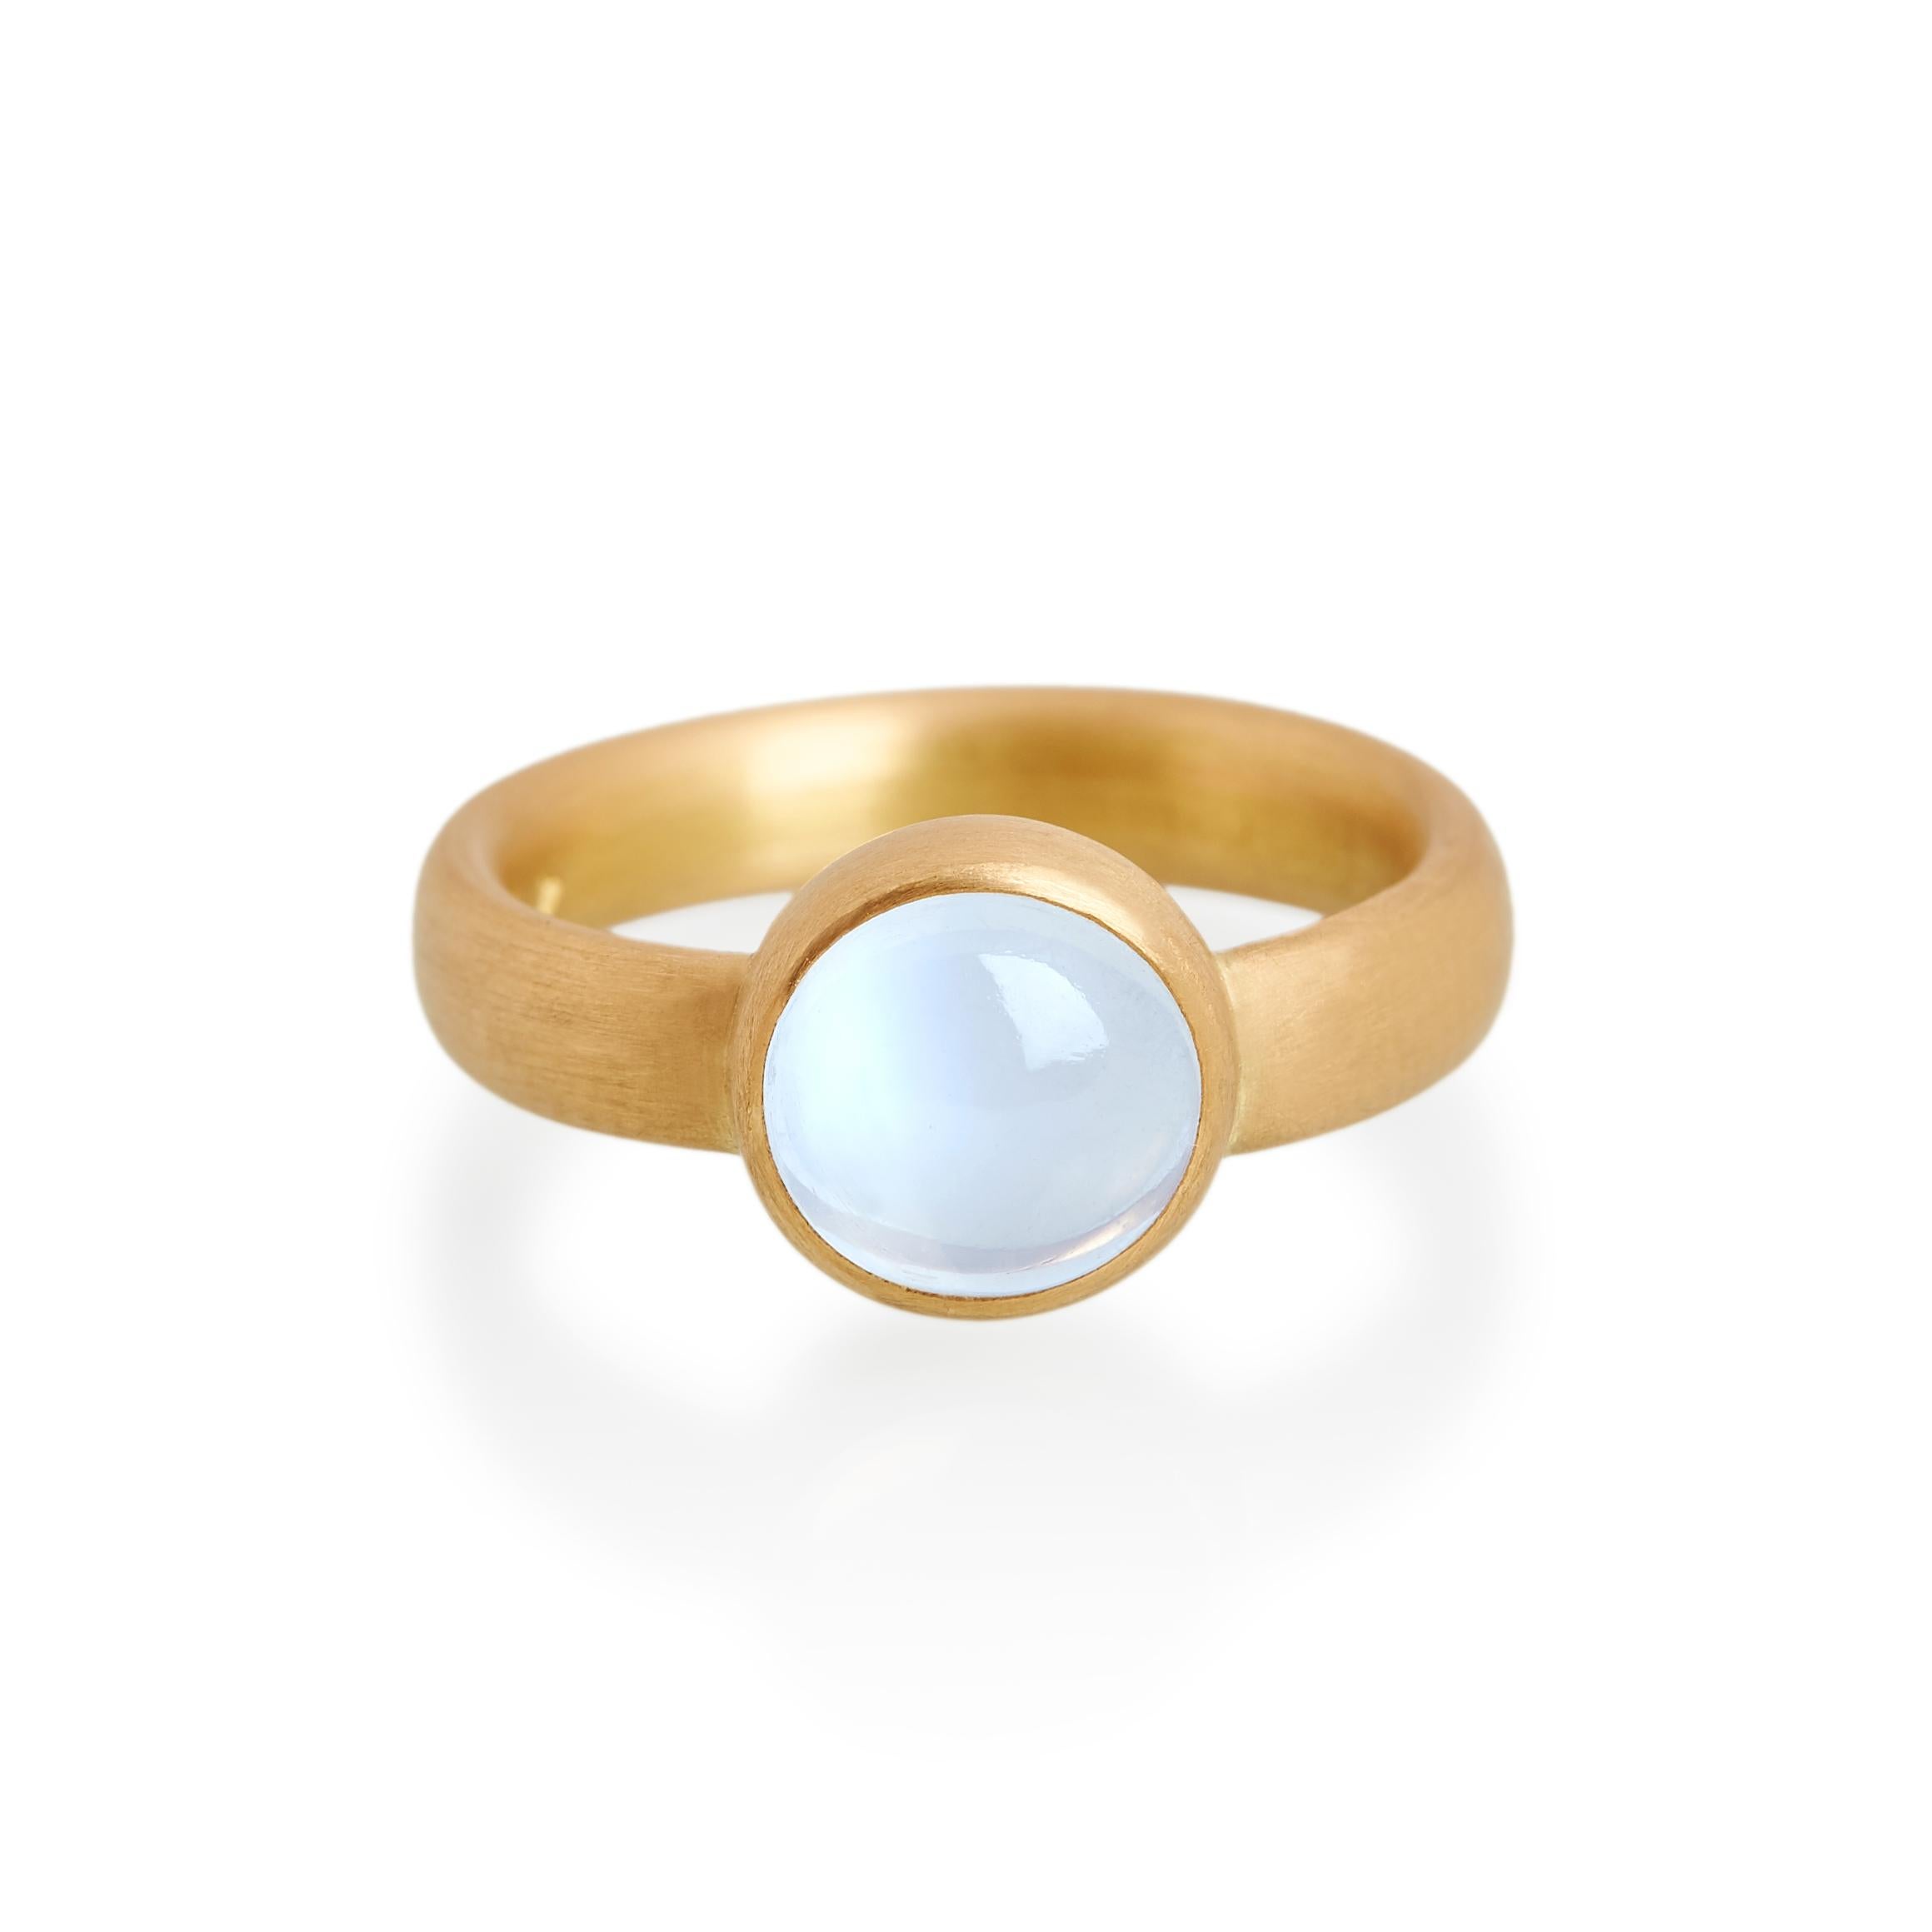 Cabochon cut fine blue moonstone ring. 
Ref: G19006

10mm round fine blue moonstone  
22ct gold (with platinum setting inlay)

Cadby & Co are a family business that specialise in reusing & up cycling old cut diamonds and fine gem stones. Deborah